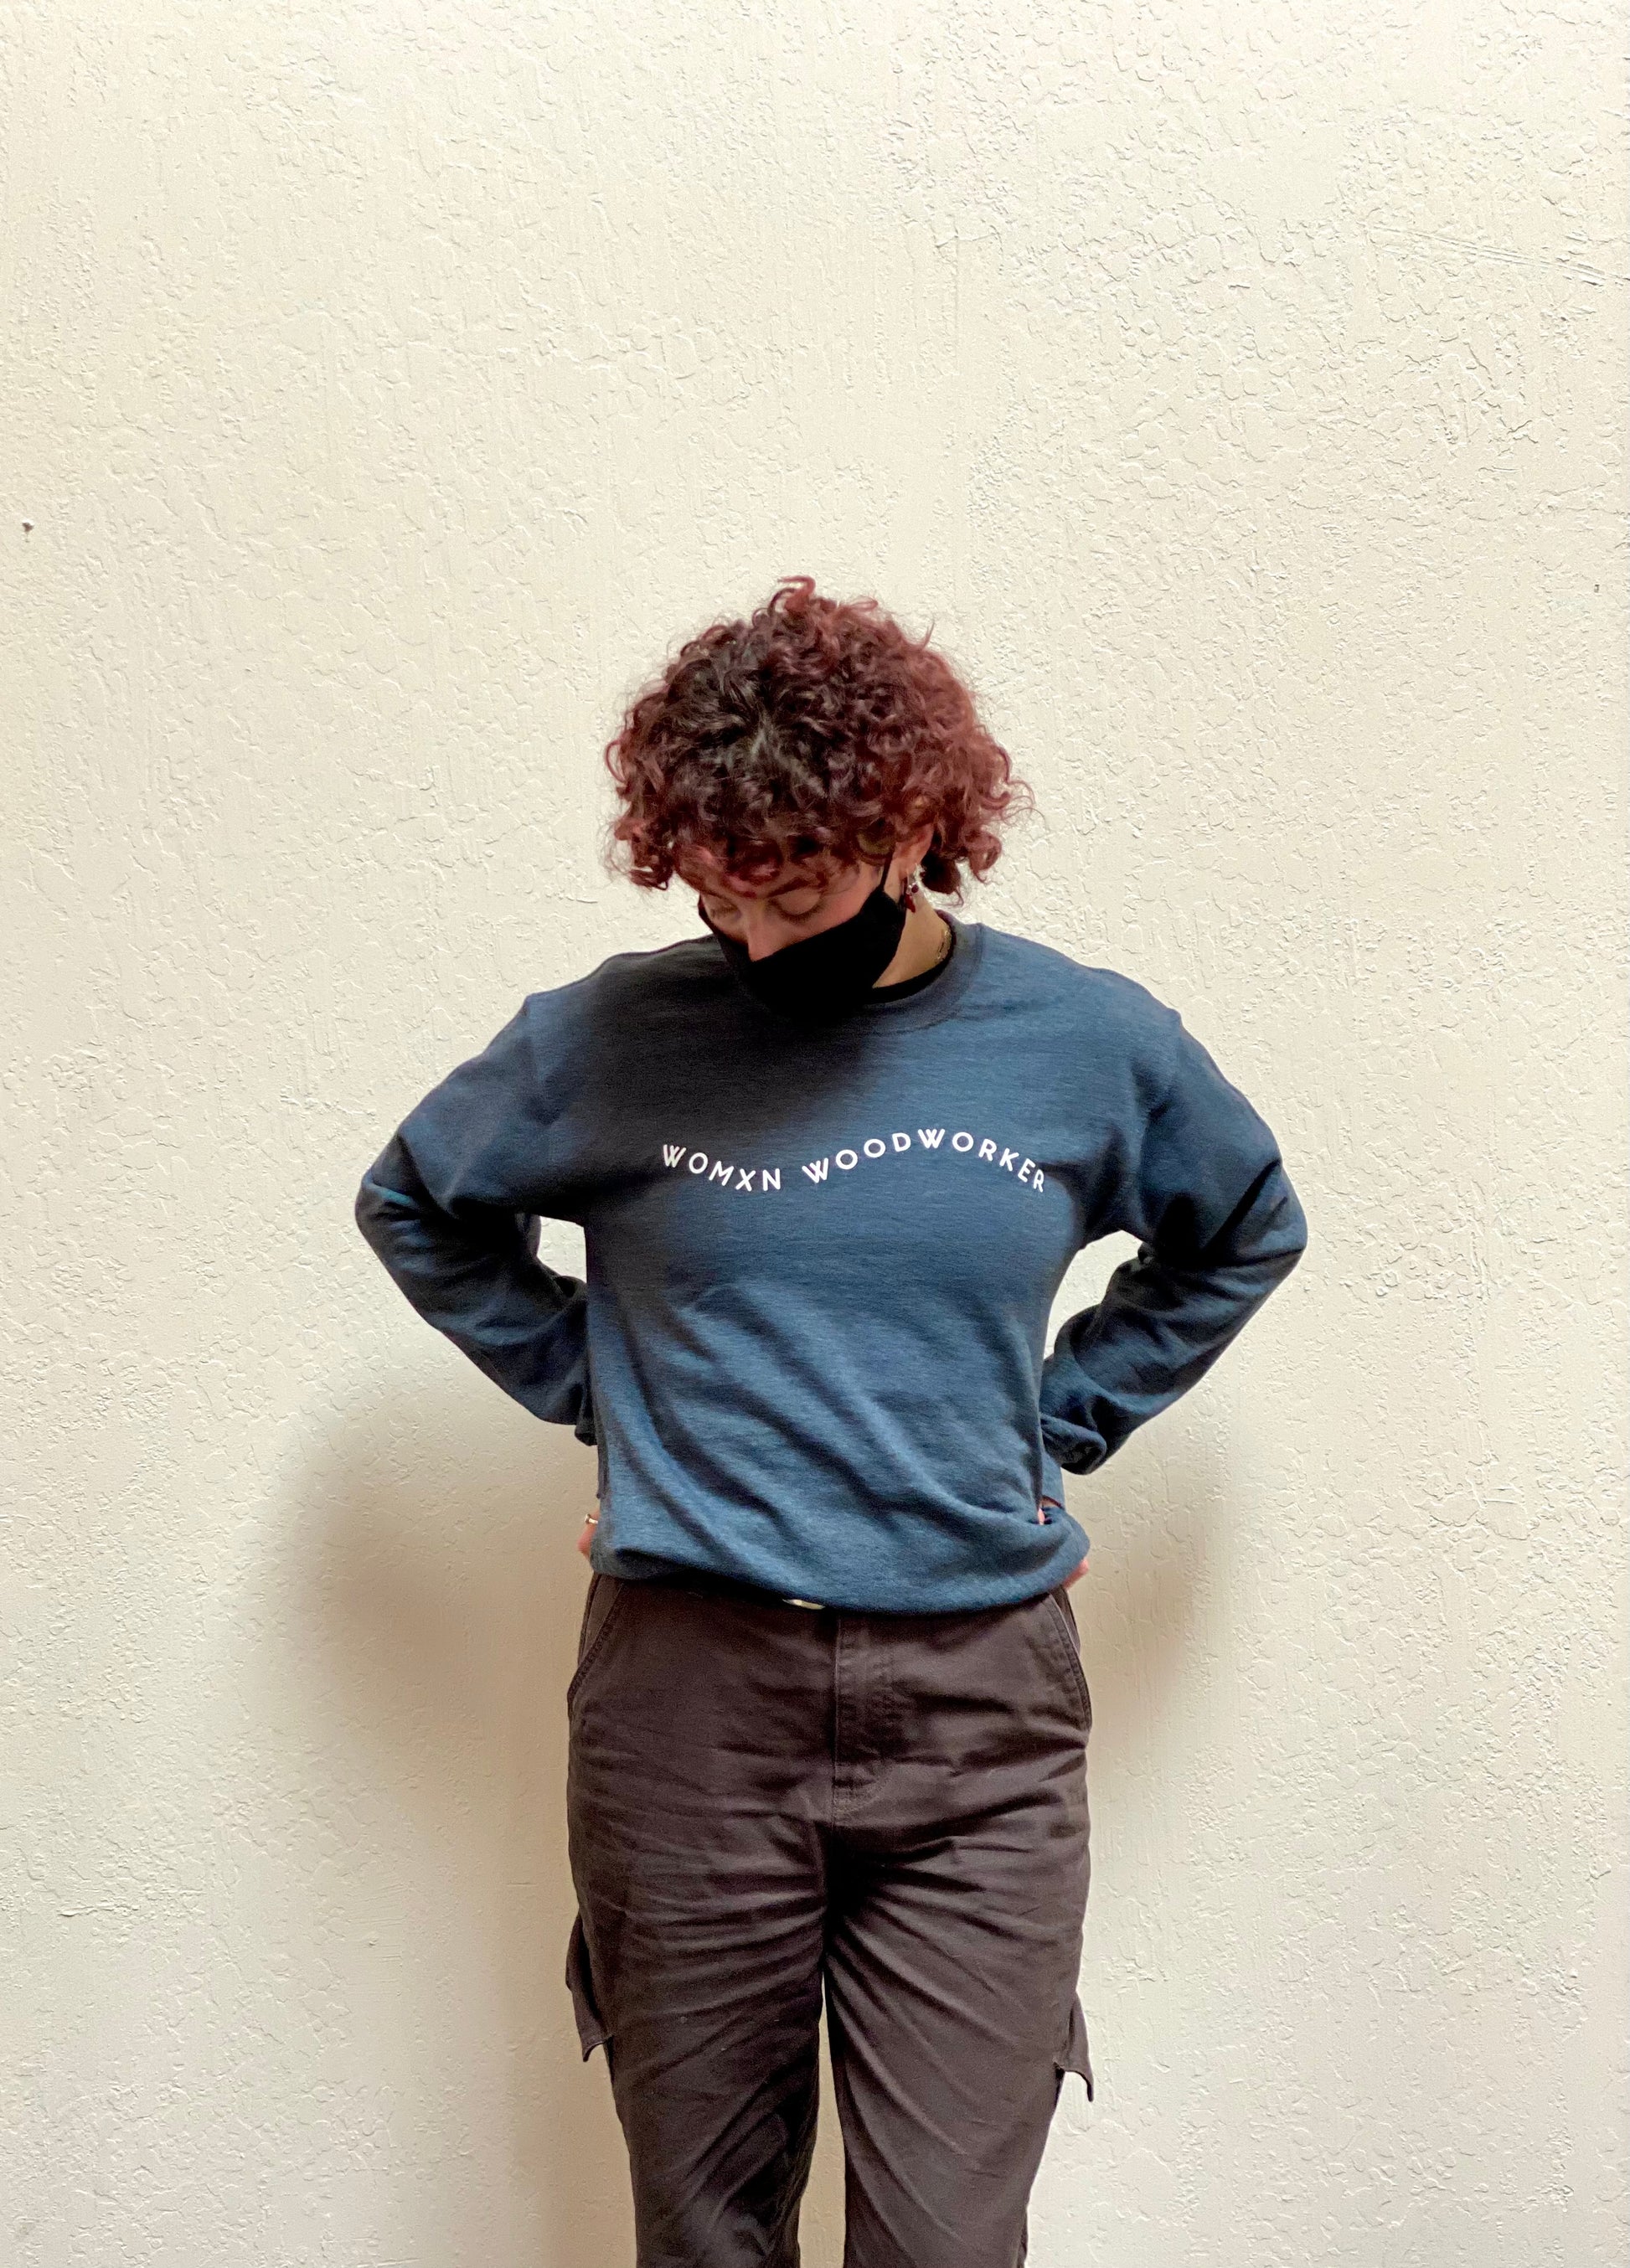 Person with red curly hair wearing Heather grey crew neck sweatshirt. Reads "Womxn Woodworker" in white font.